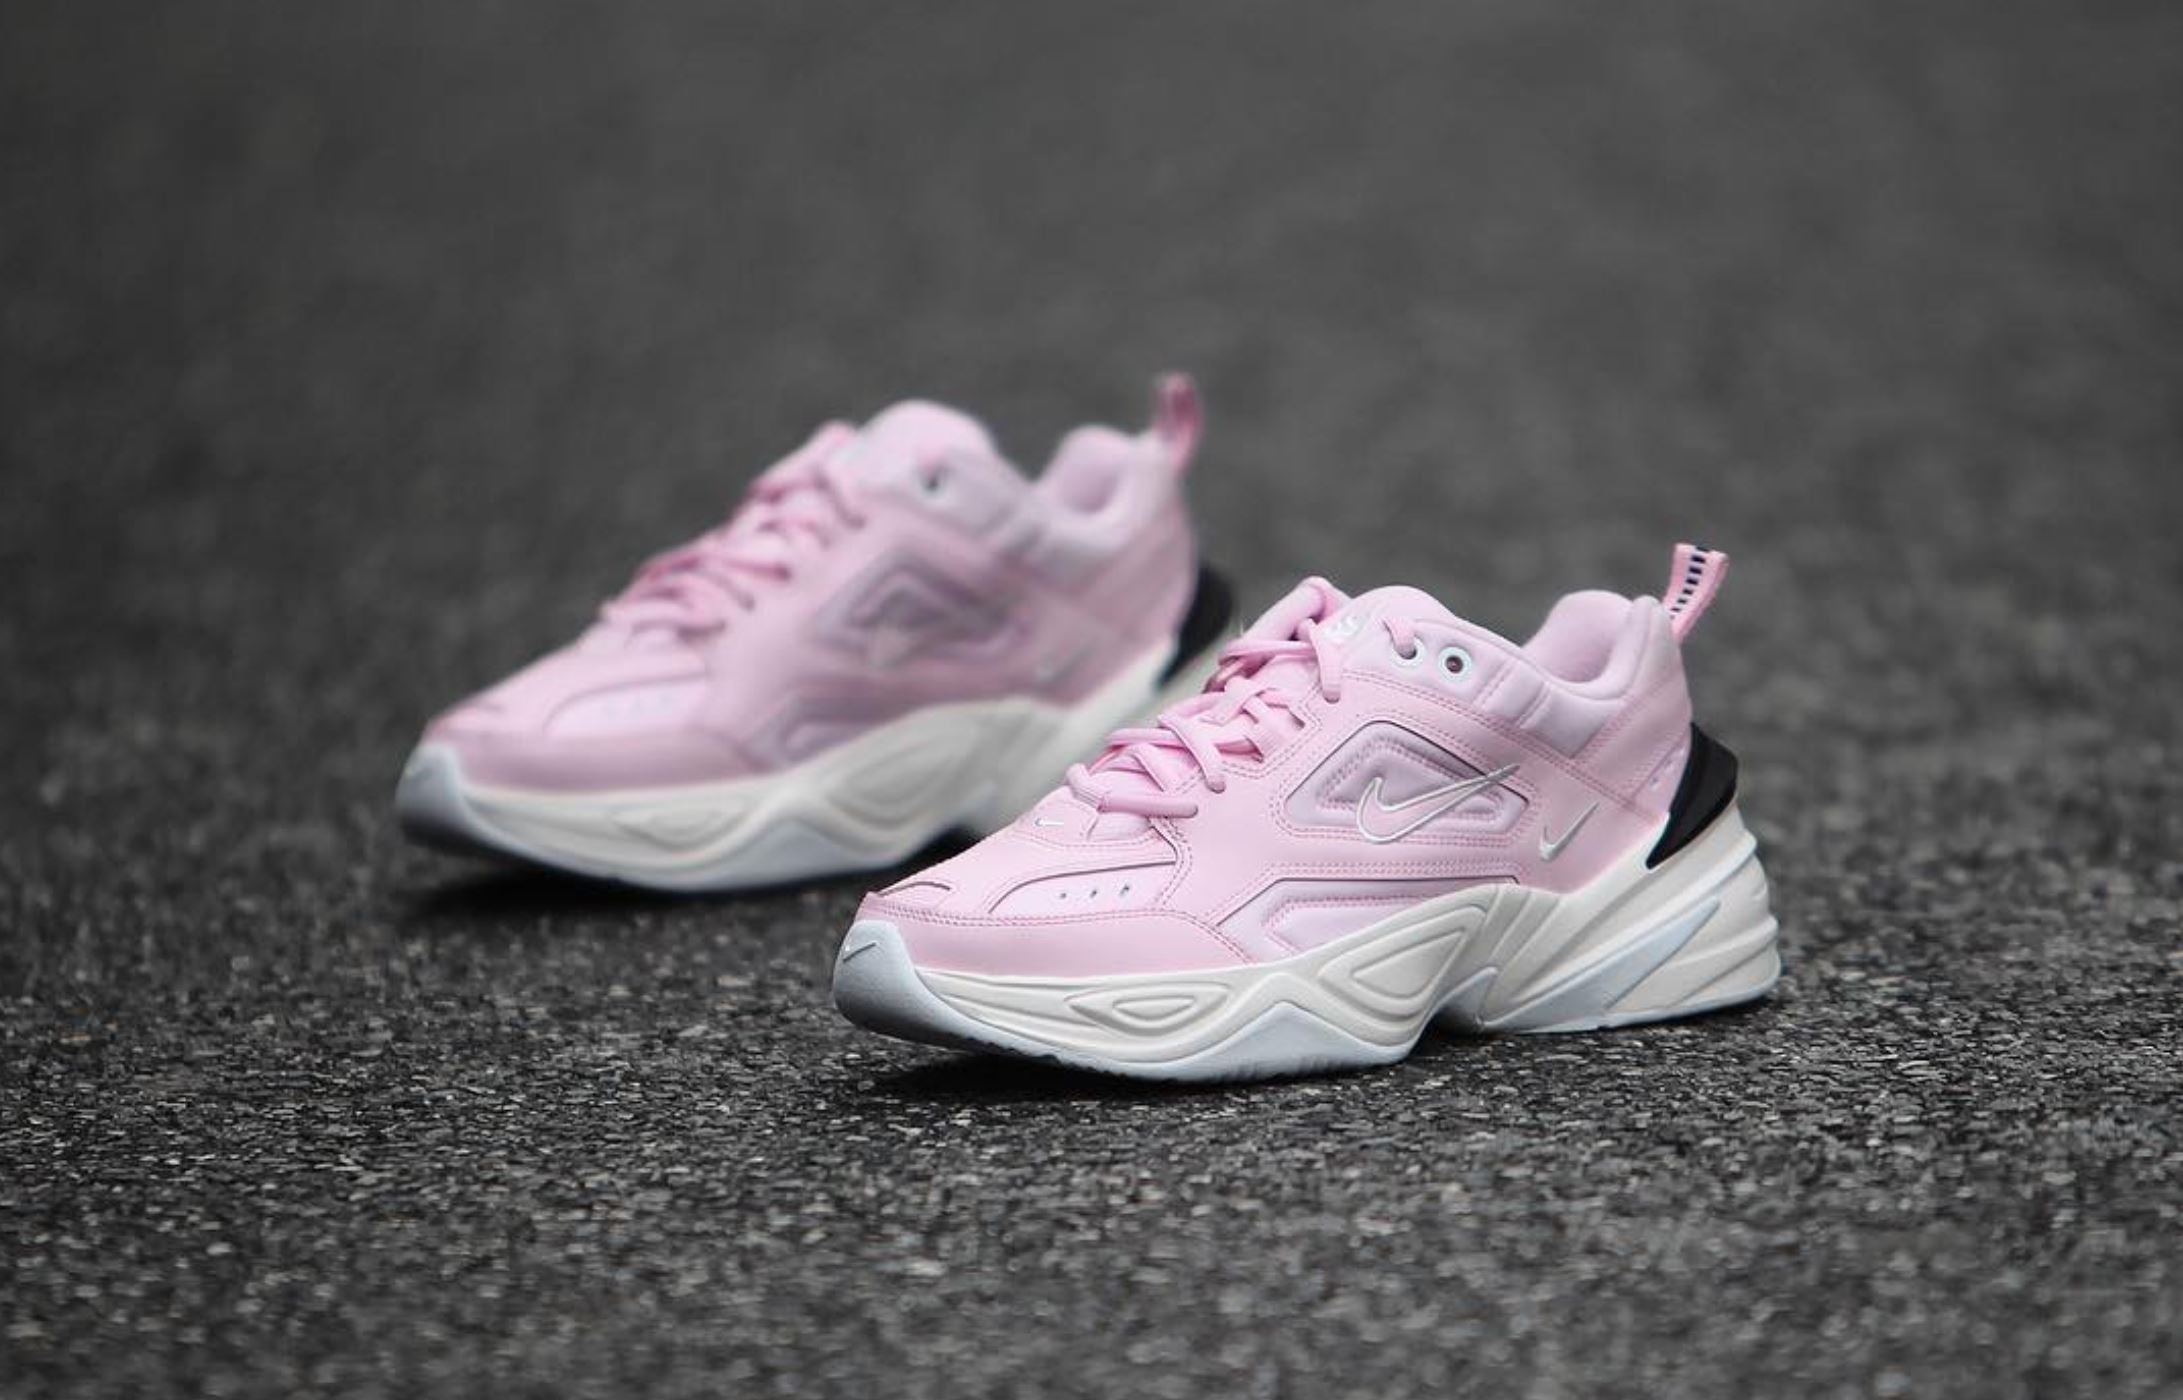 Expect A Pink Nike M2k Tekno To Release This Weekend Weartesters